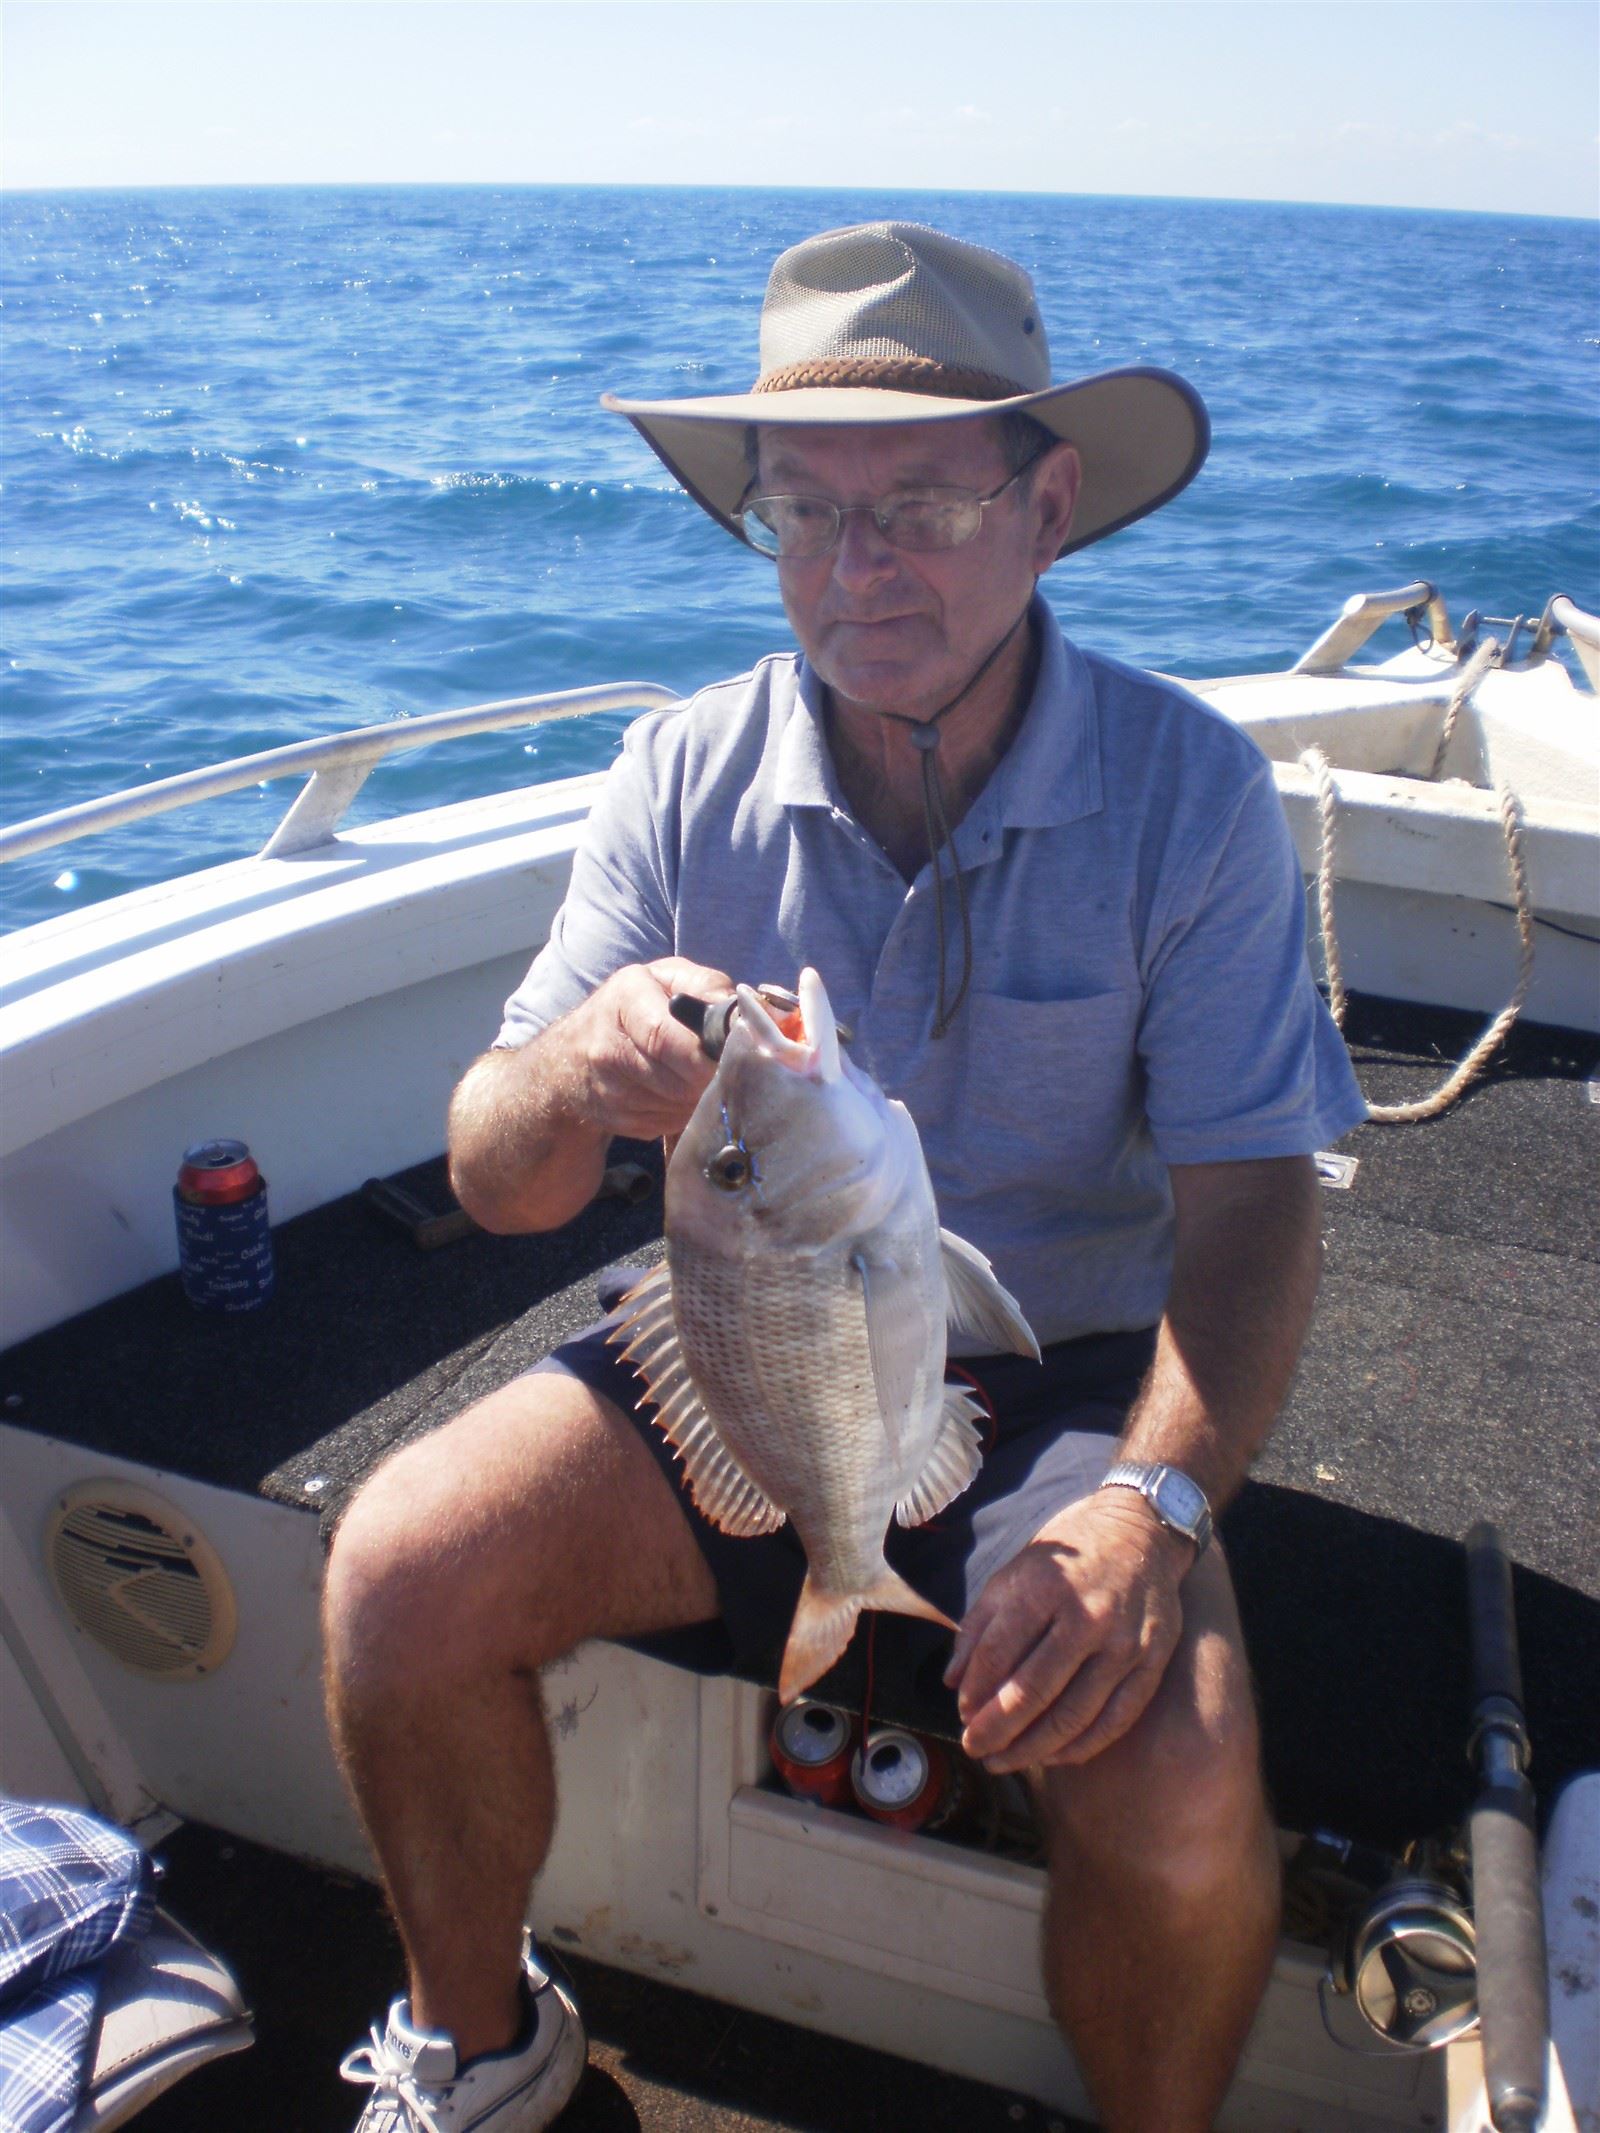 Tricky snapper caught wide of Dundee using an 80lb wind on leader